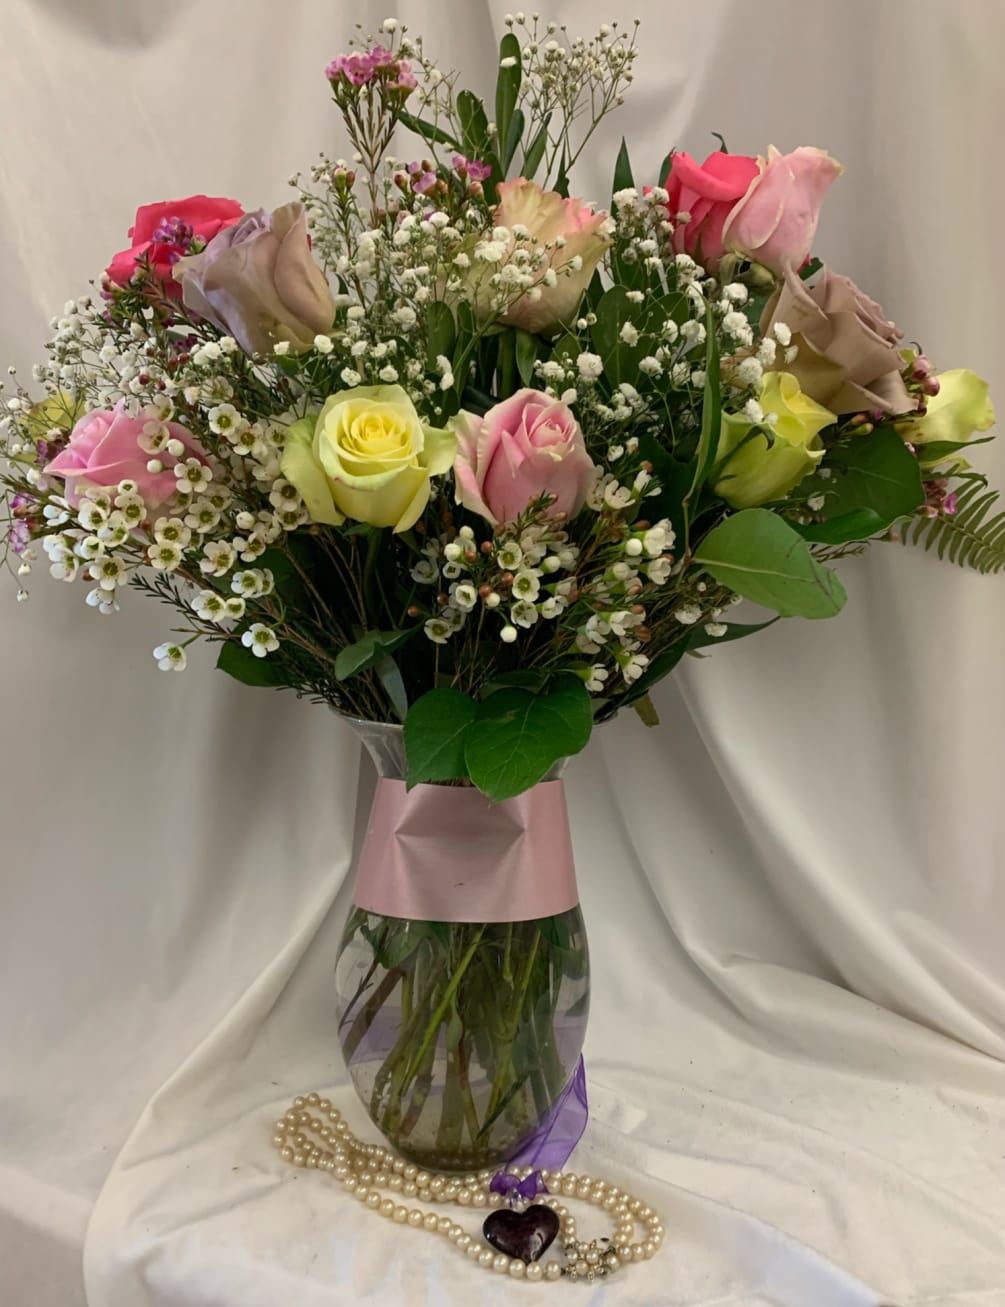 A dozen soft, pastel colored roses reminiscent of the gentle love of